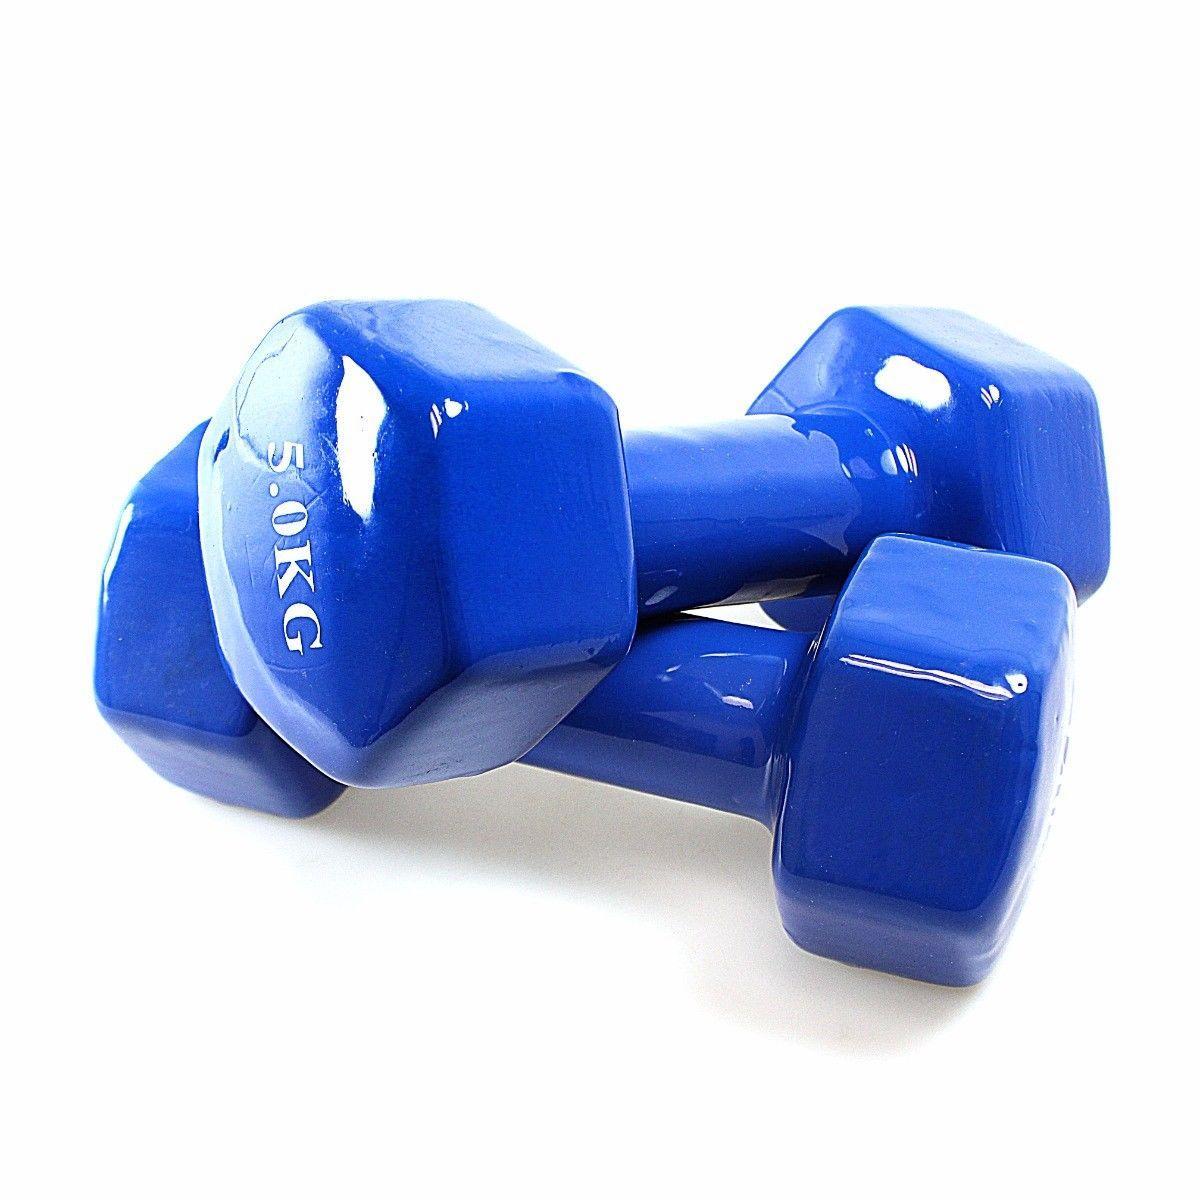 1 Piece Blue Vinyl Fitness Dumbbell 5kg For Fitness Boxing Home Gym 4593 A W25  (Parcel Rate)